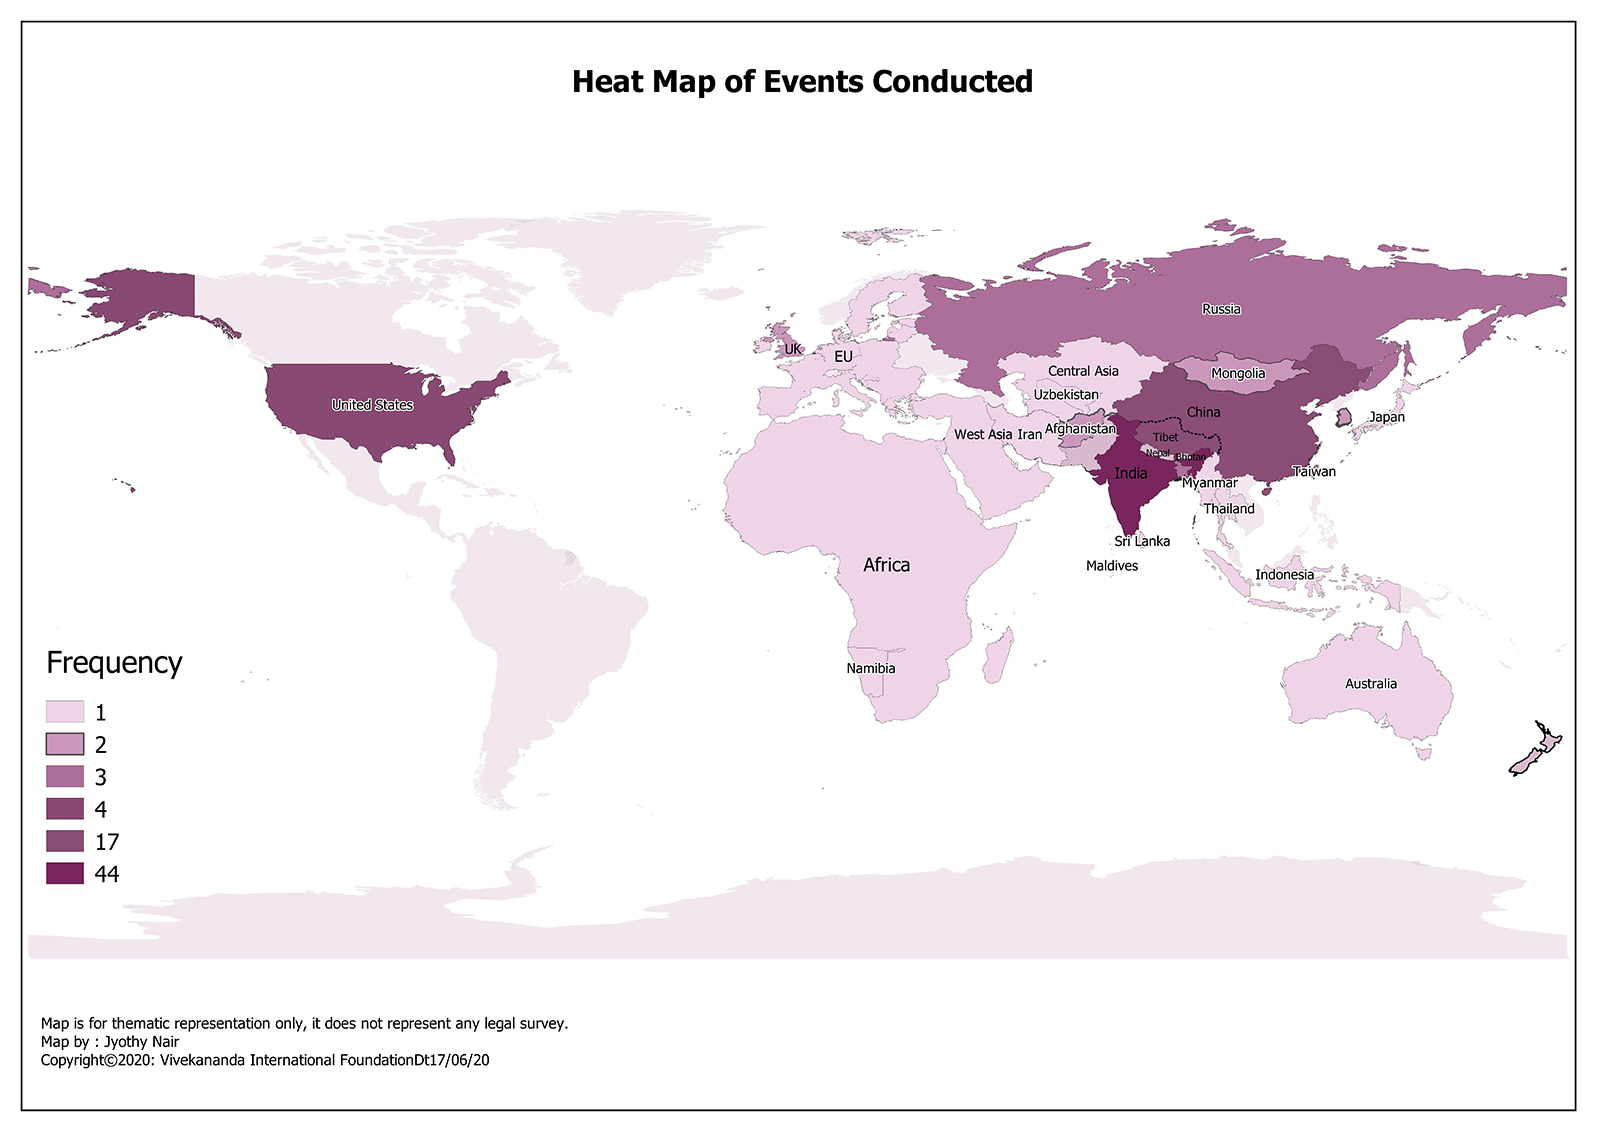 Heat map of events